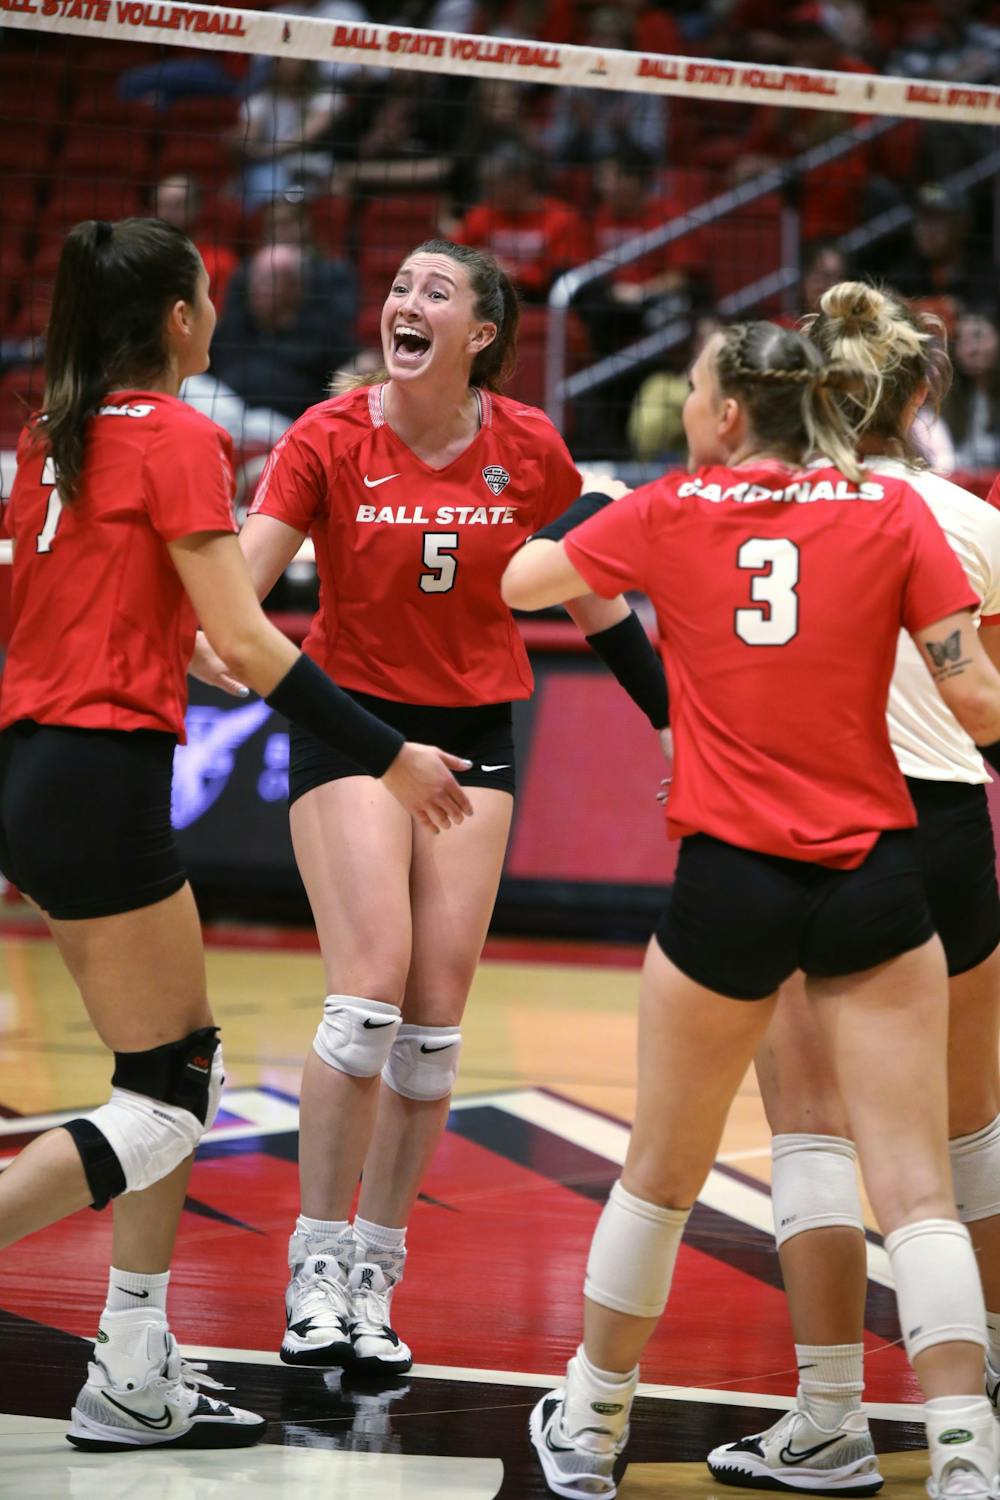 Fourth-year middle blocker Marie Plitt celebrates fourth-year outside hitter Natalie Risi scoring a point in a game against Eastern Michigan Sept. 30 at Worthen Arena. Ball State beat Eastern Michigan 3-1. Amber Pietz, DN